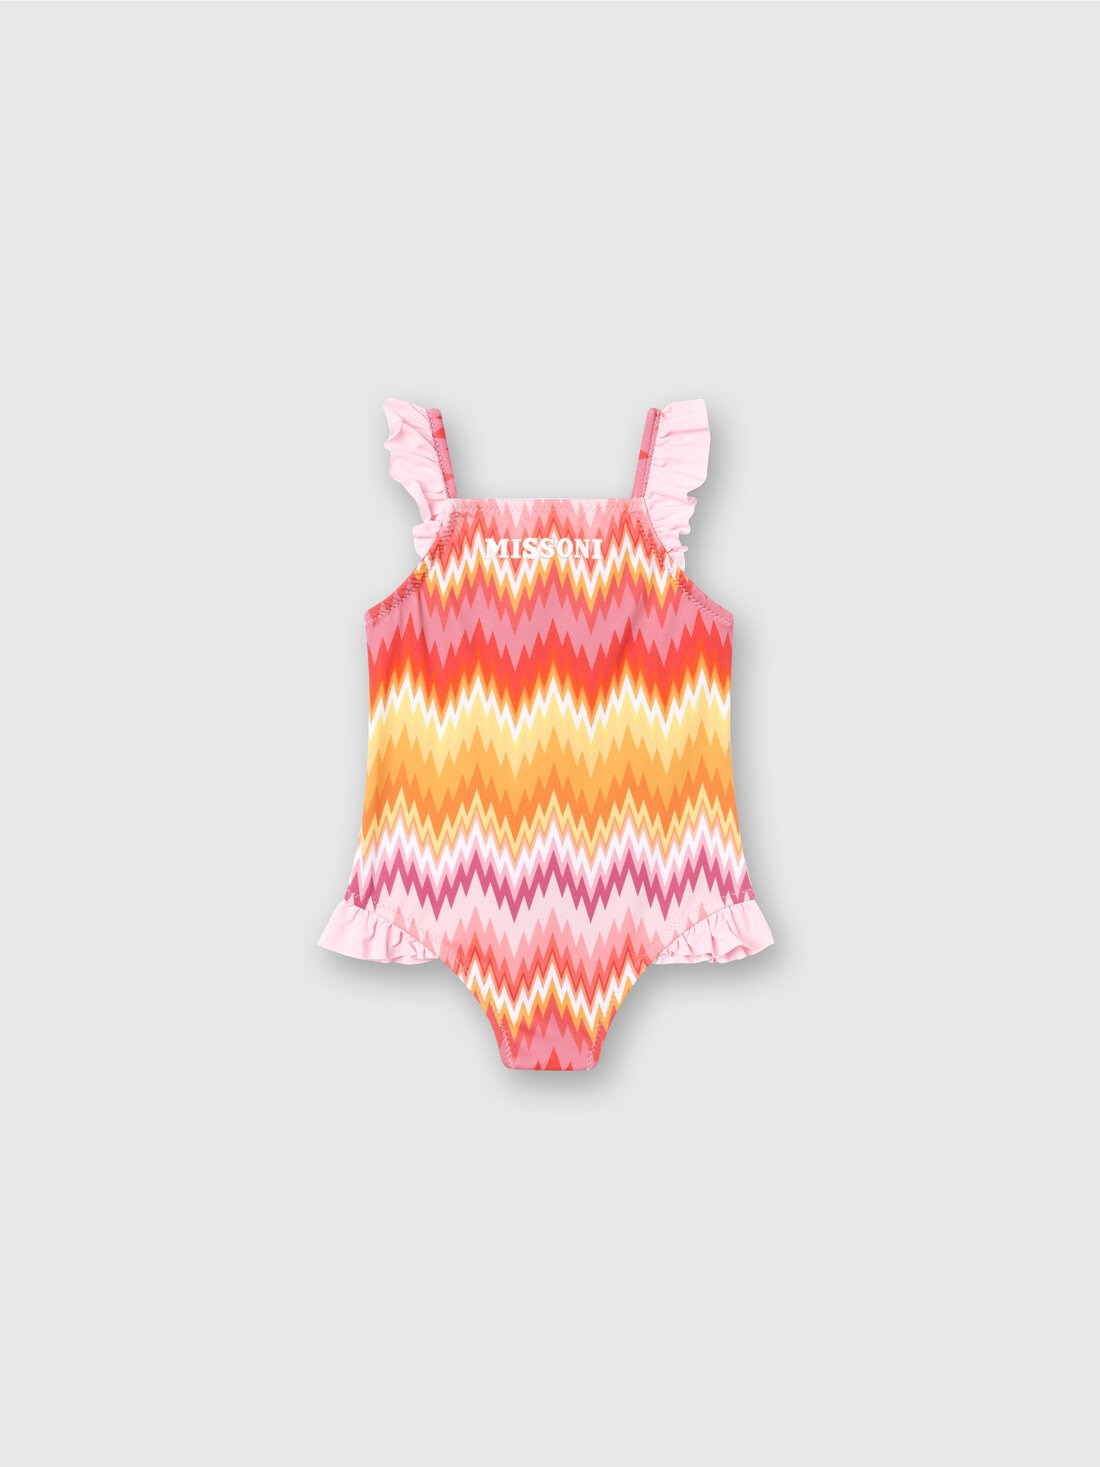 One-piece swimming costume with chevron pattern, ruffle and logo, Multicoloured  - KS24SP06BV00FVSM923 - 0